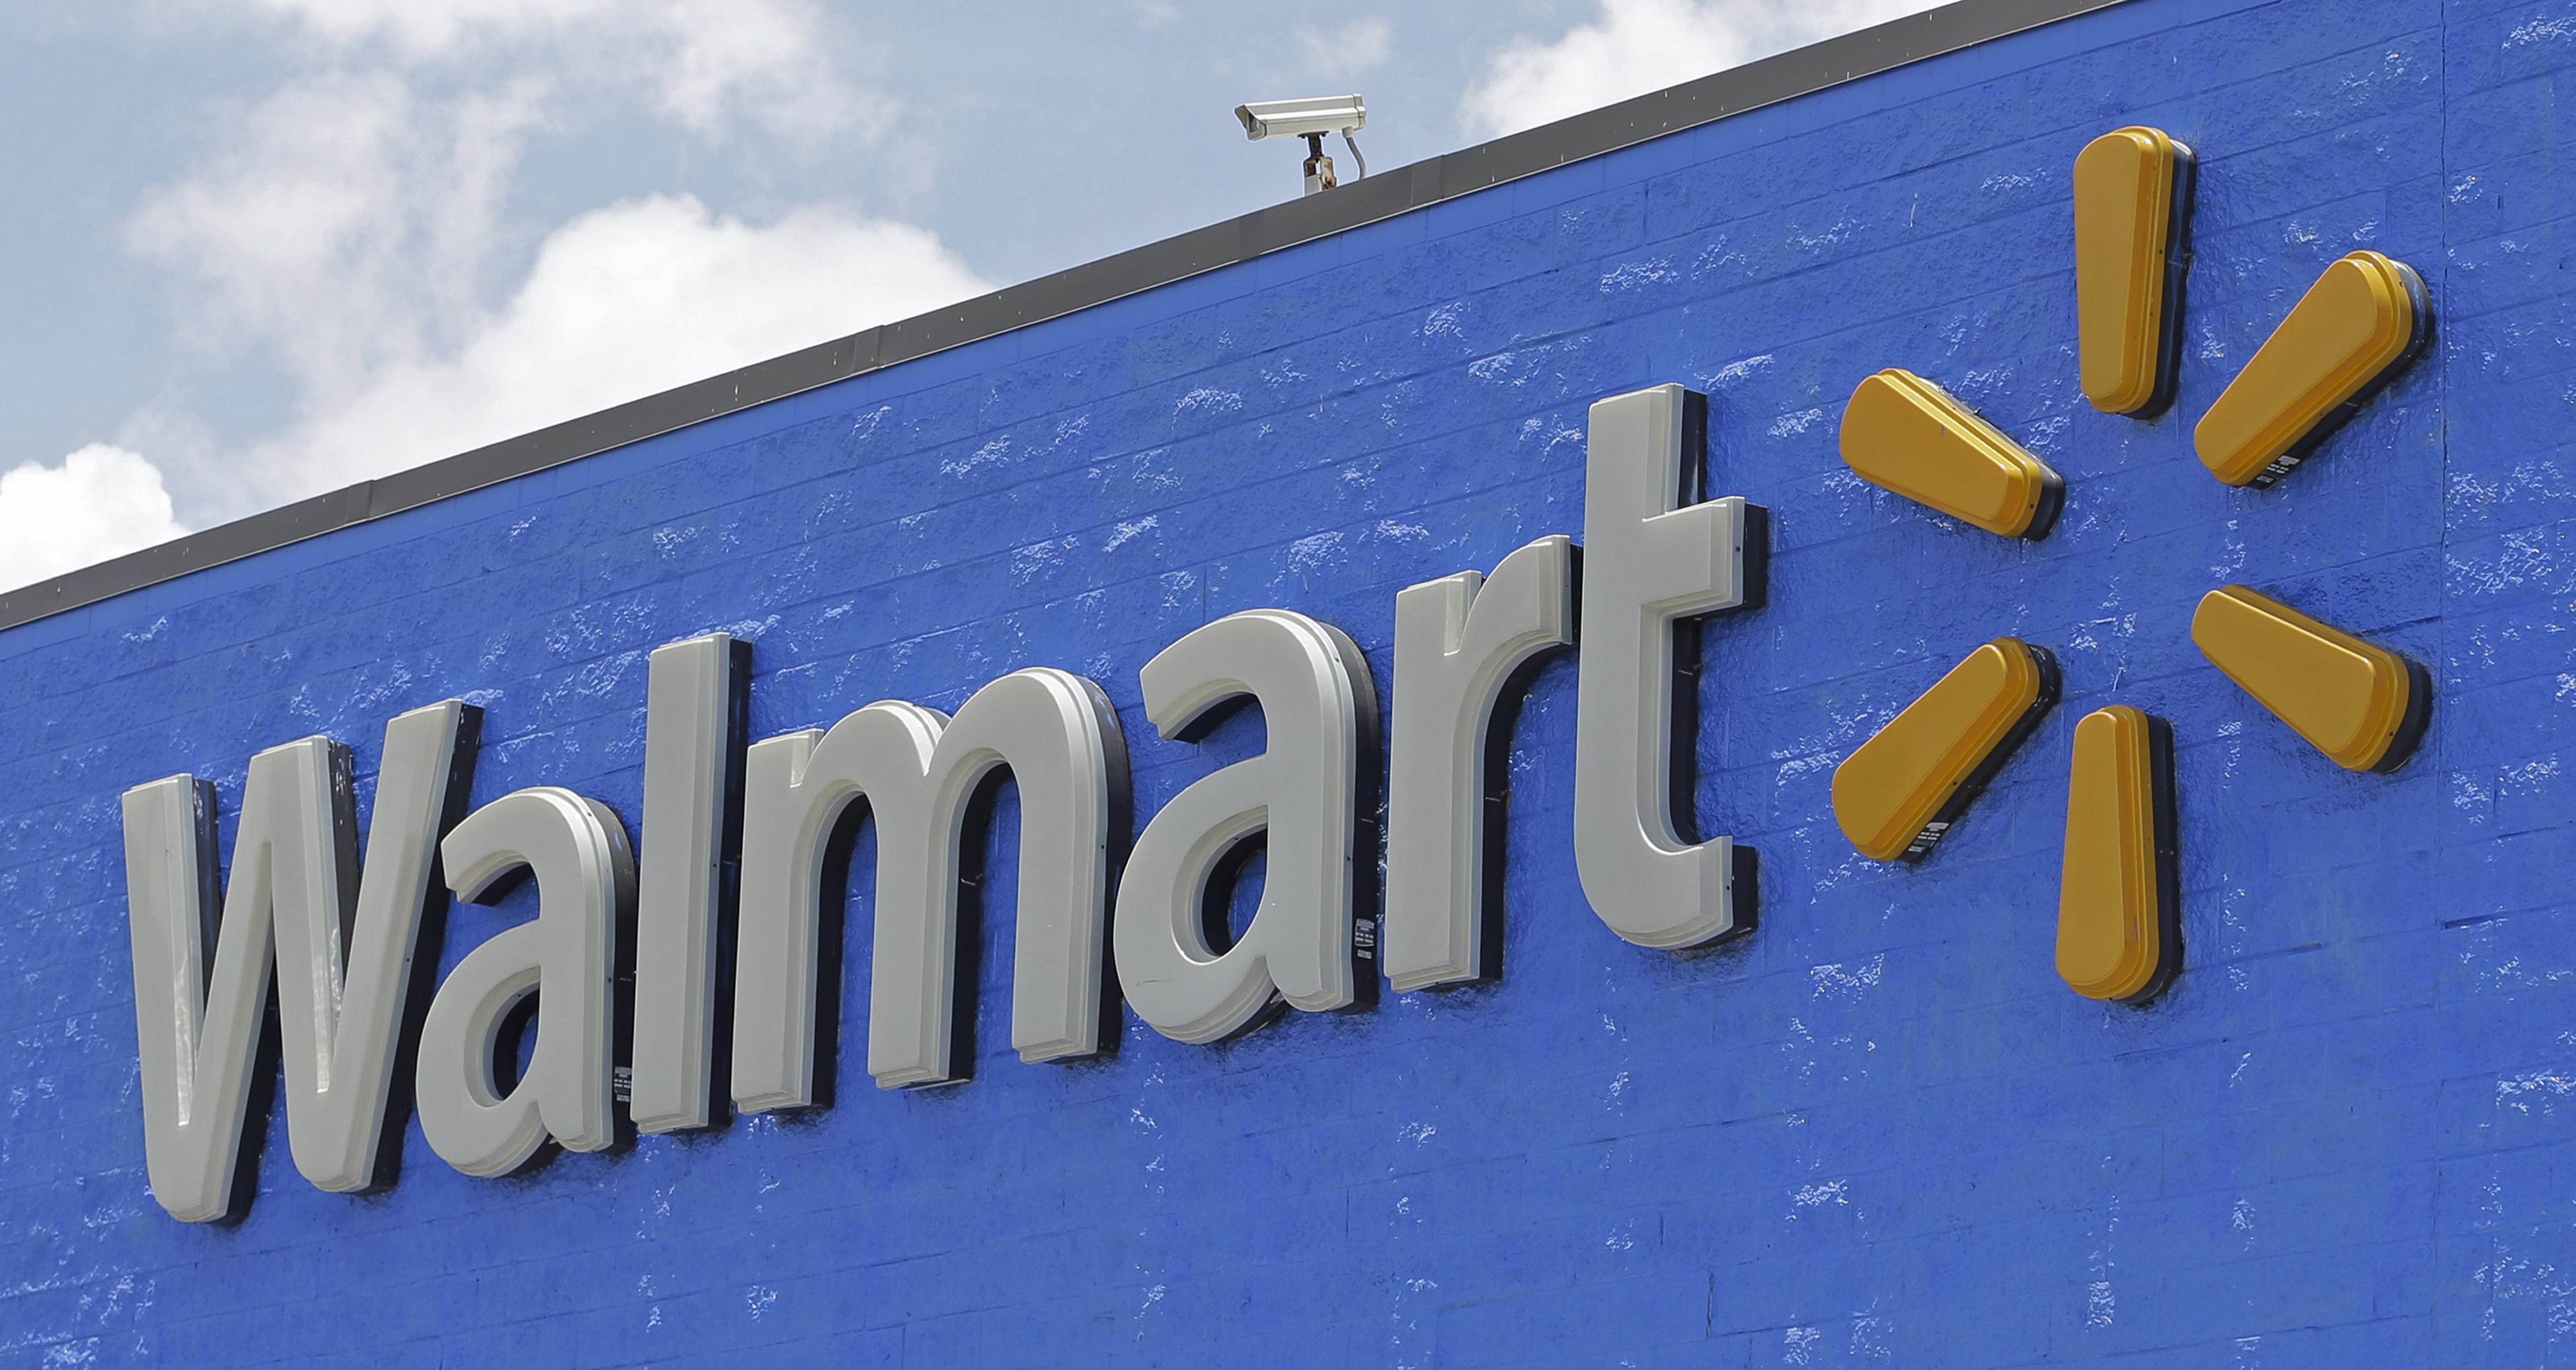 Walmart Reportedly Eyes Deal With Insurer Humana The Spokesman